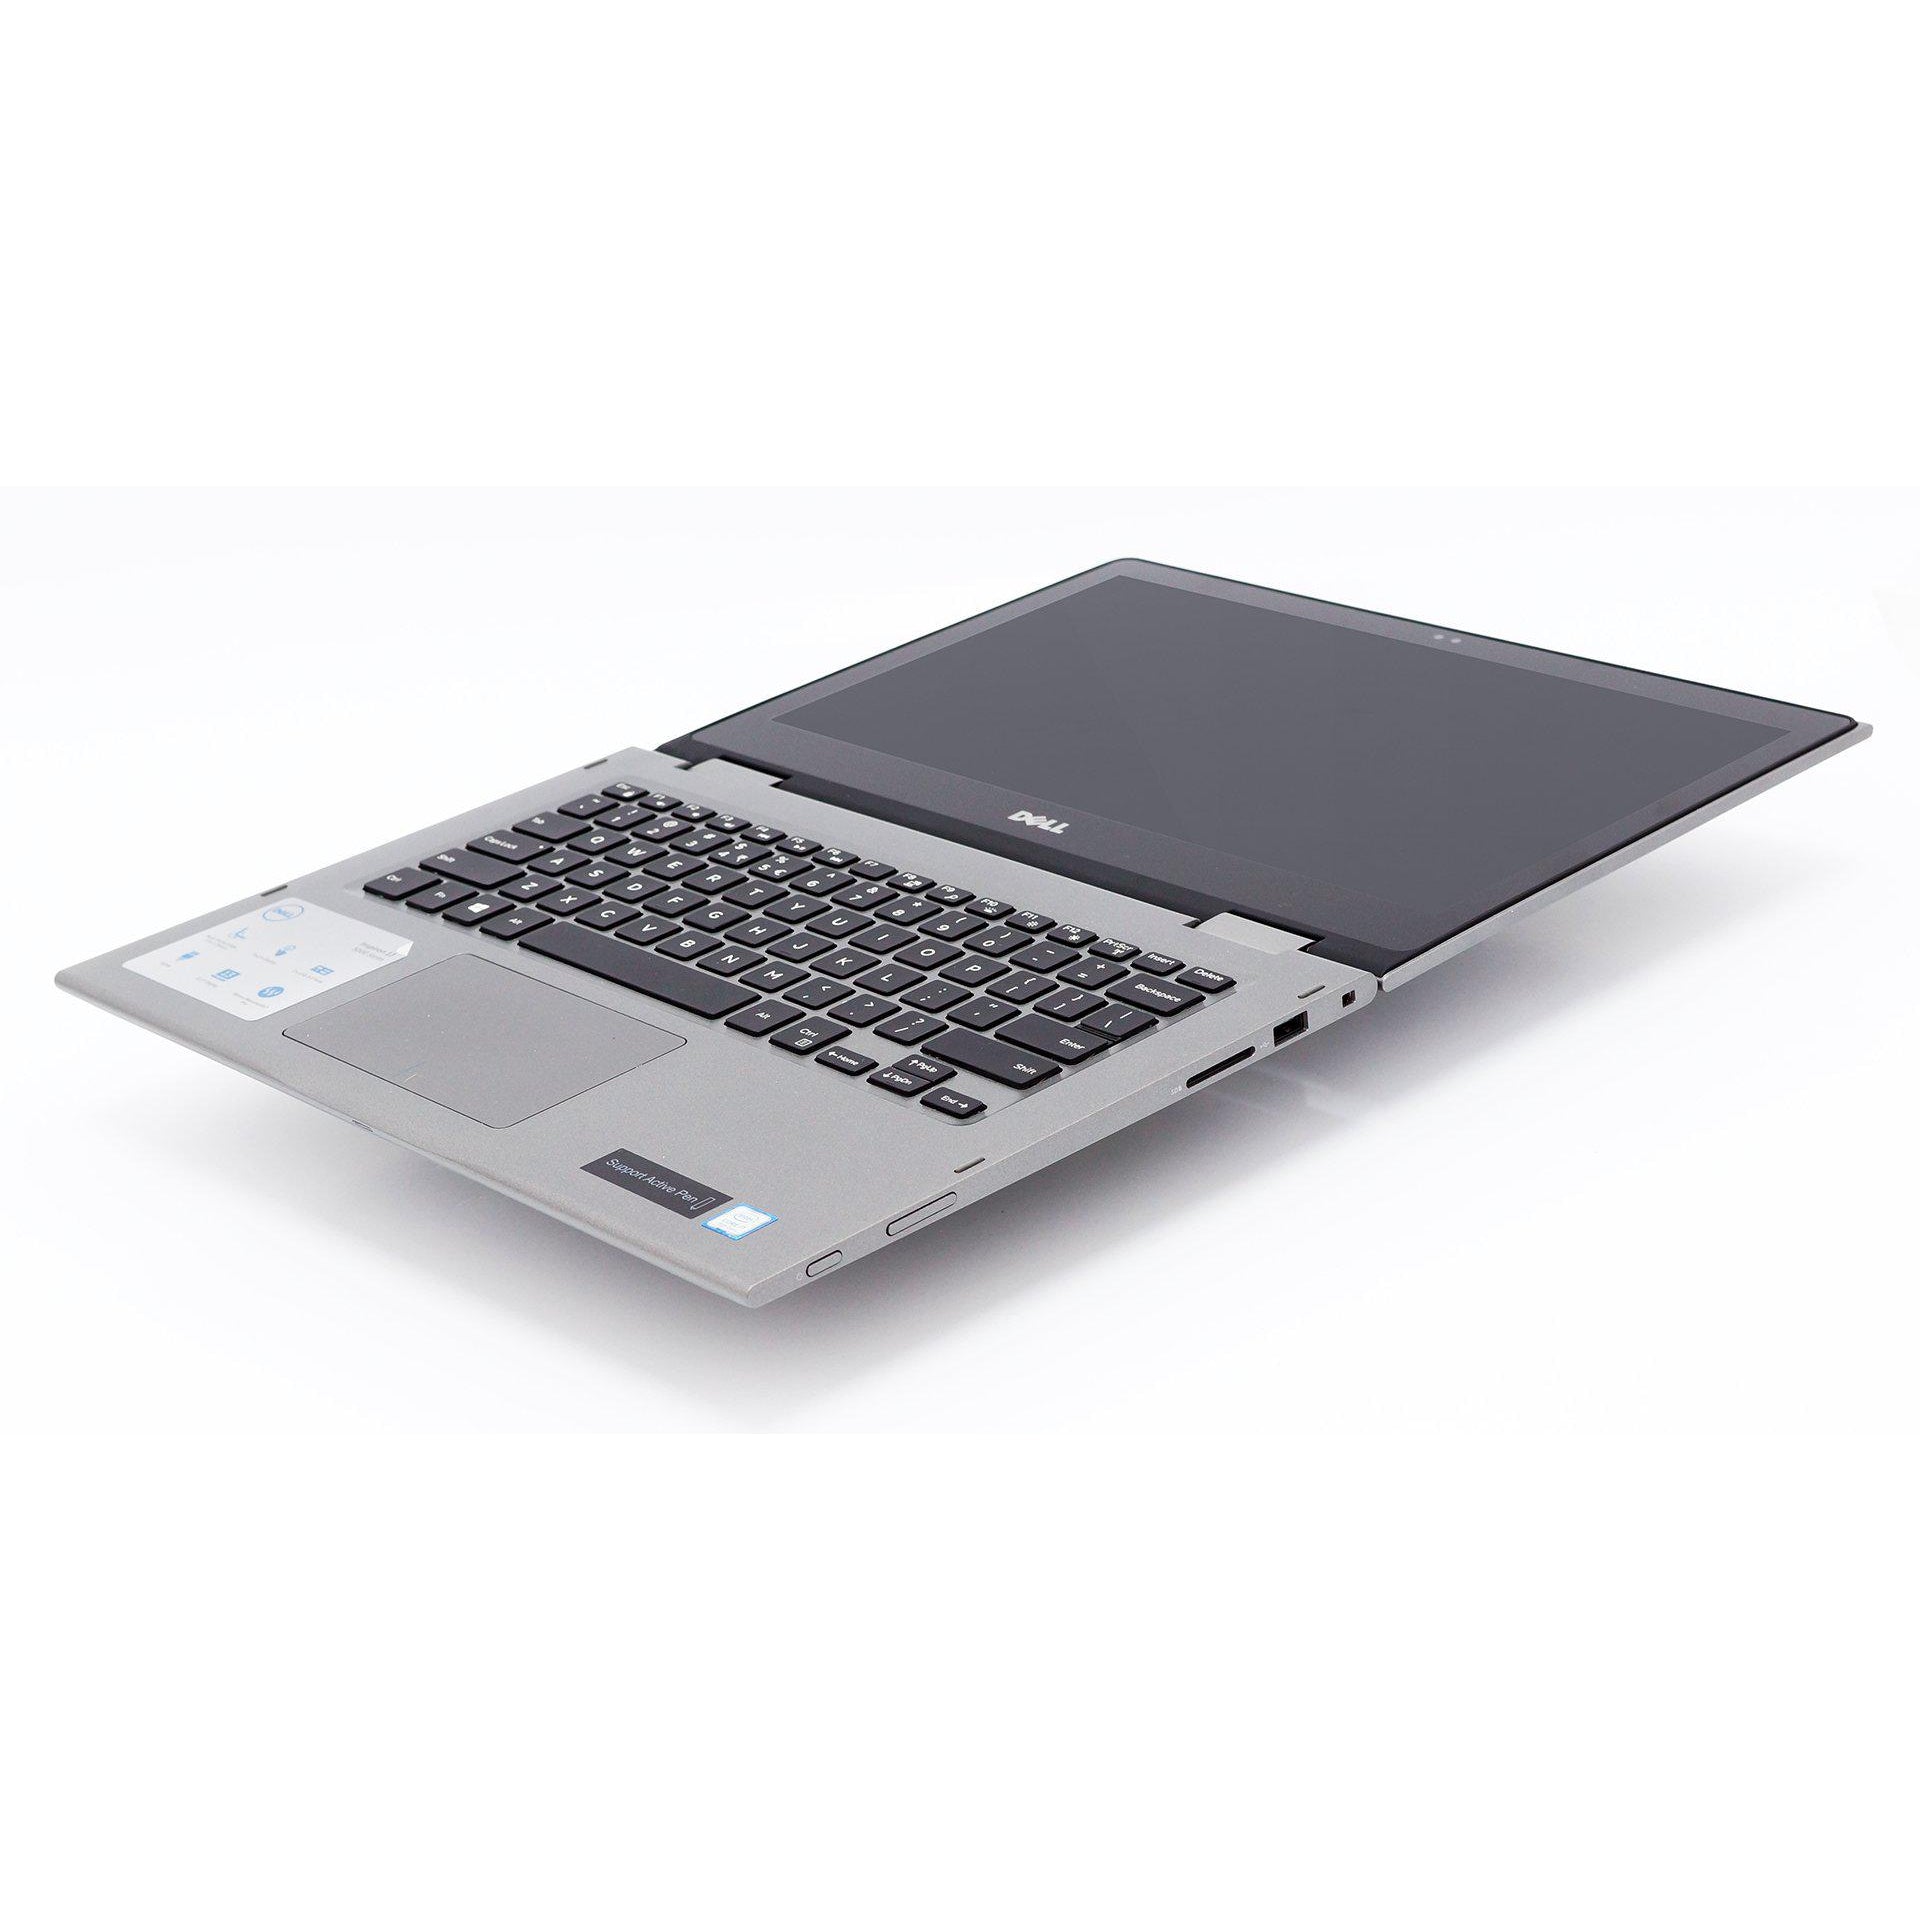 Dell Inspiron 13 5379, 13.3" Laptop, Intel Core i5, 8GB RAM, 256GB SSD, Grey - Refurbished Excellent